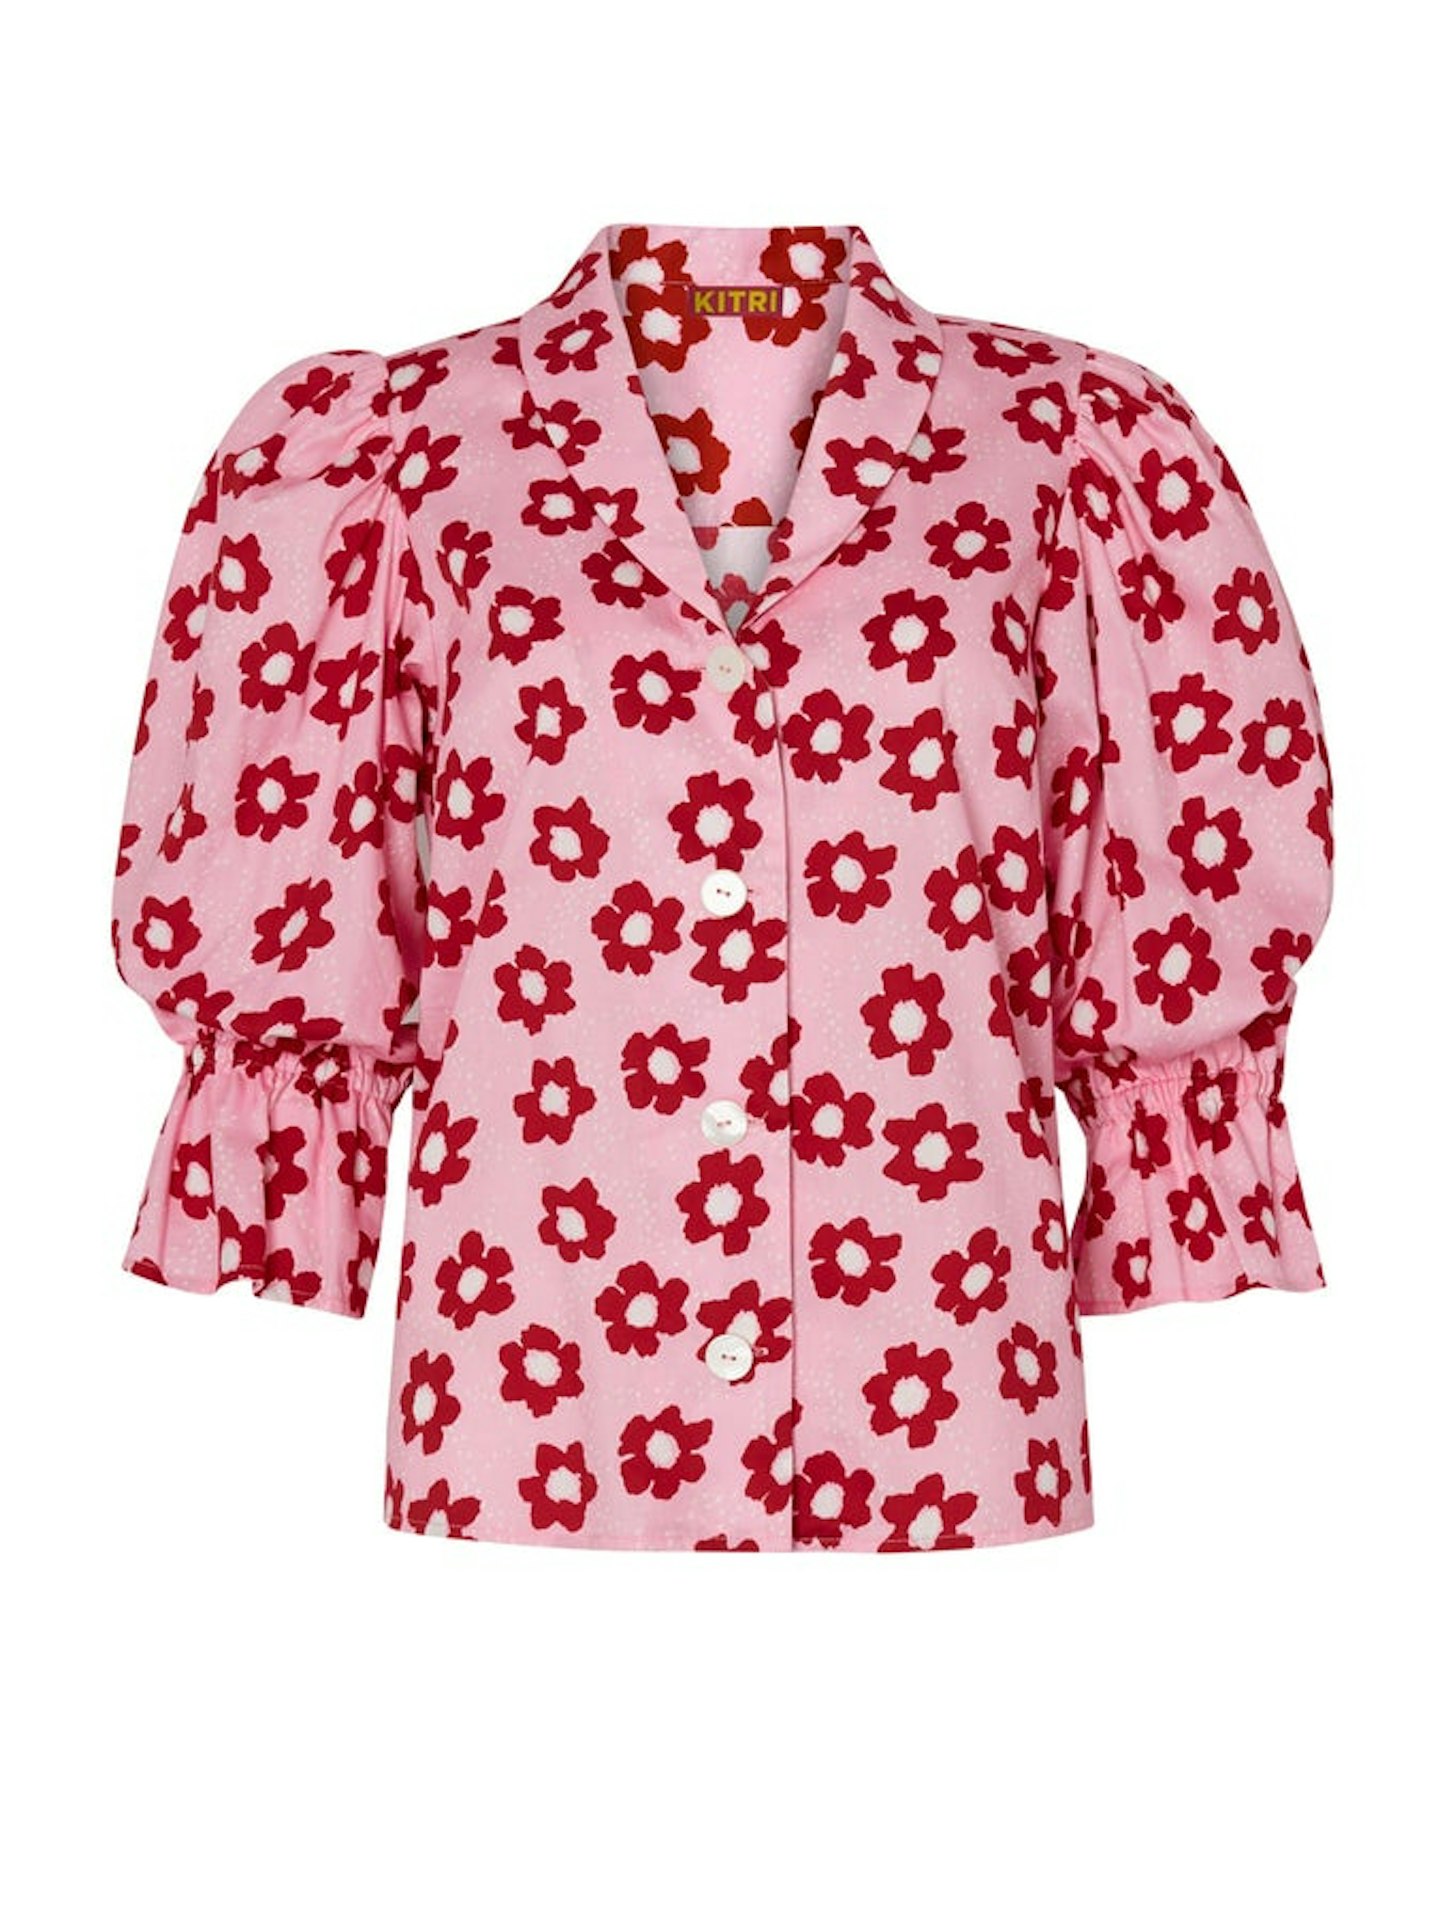 Kitri, Bretta Pink Floral Cotton Top, WAS £85 NOW £65